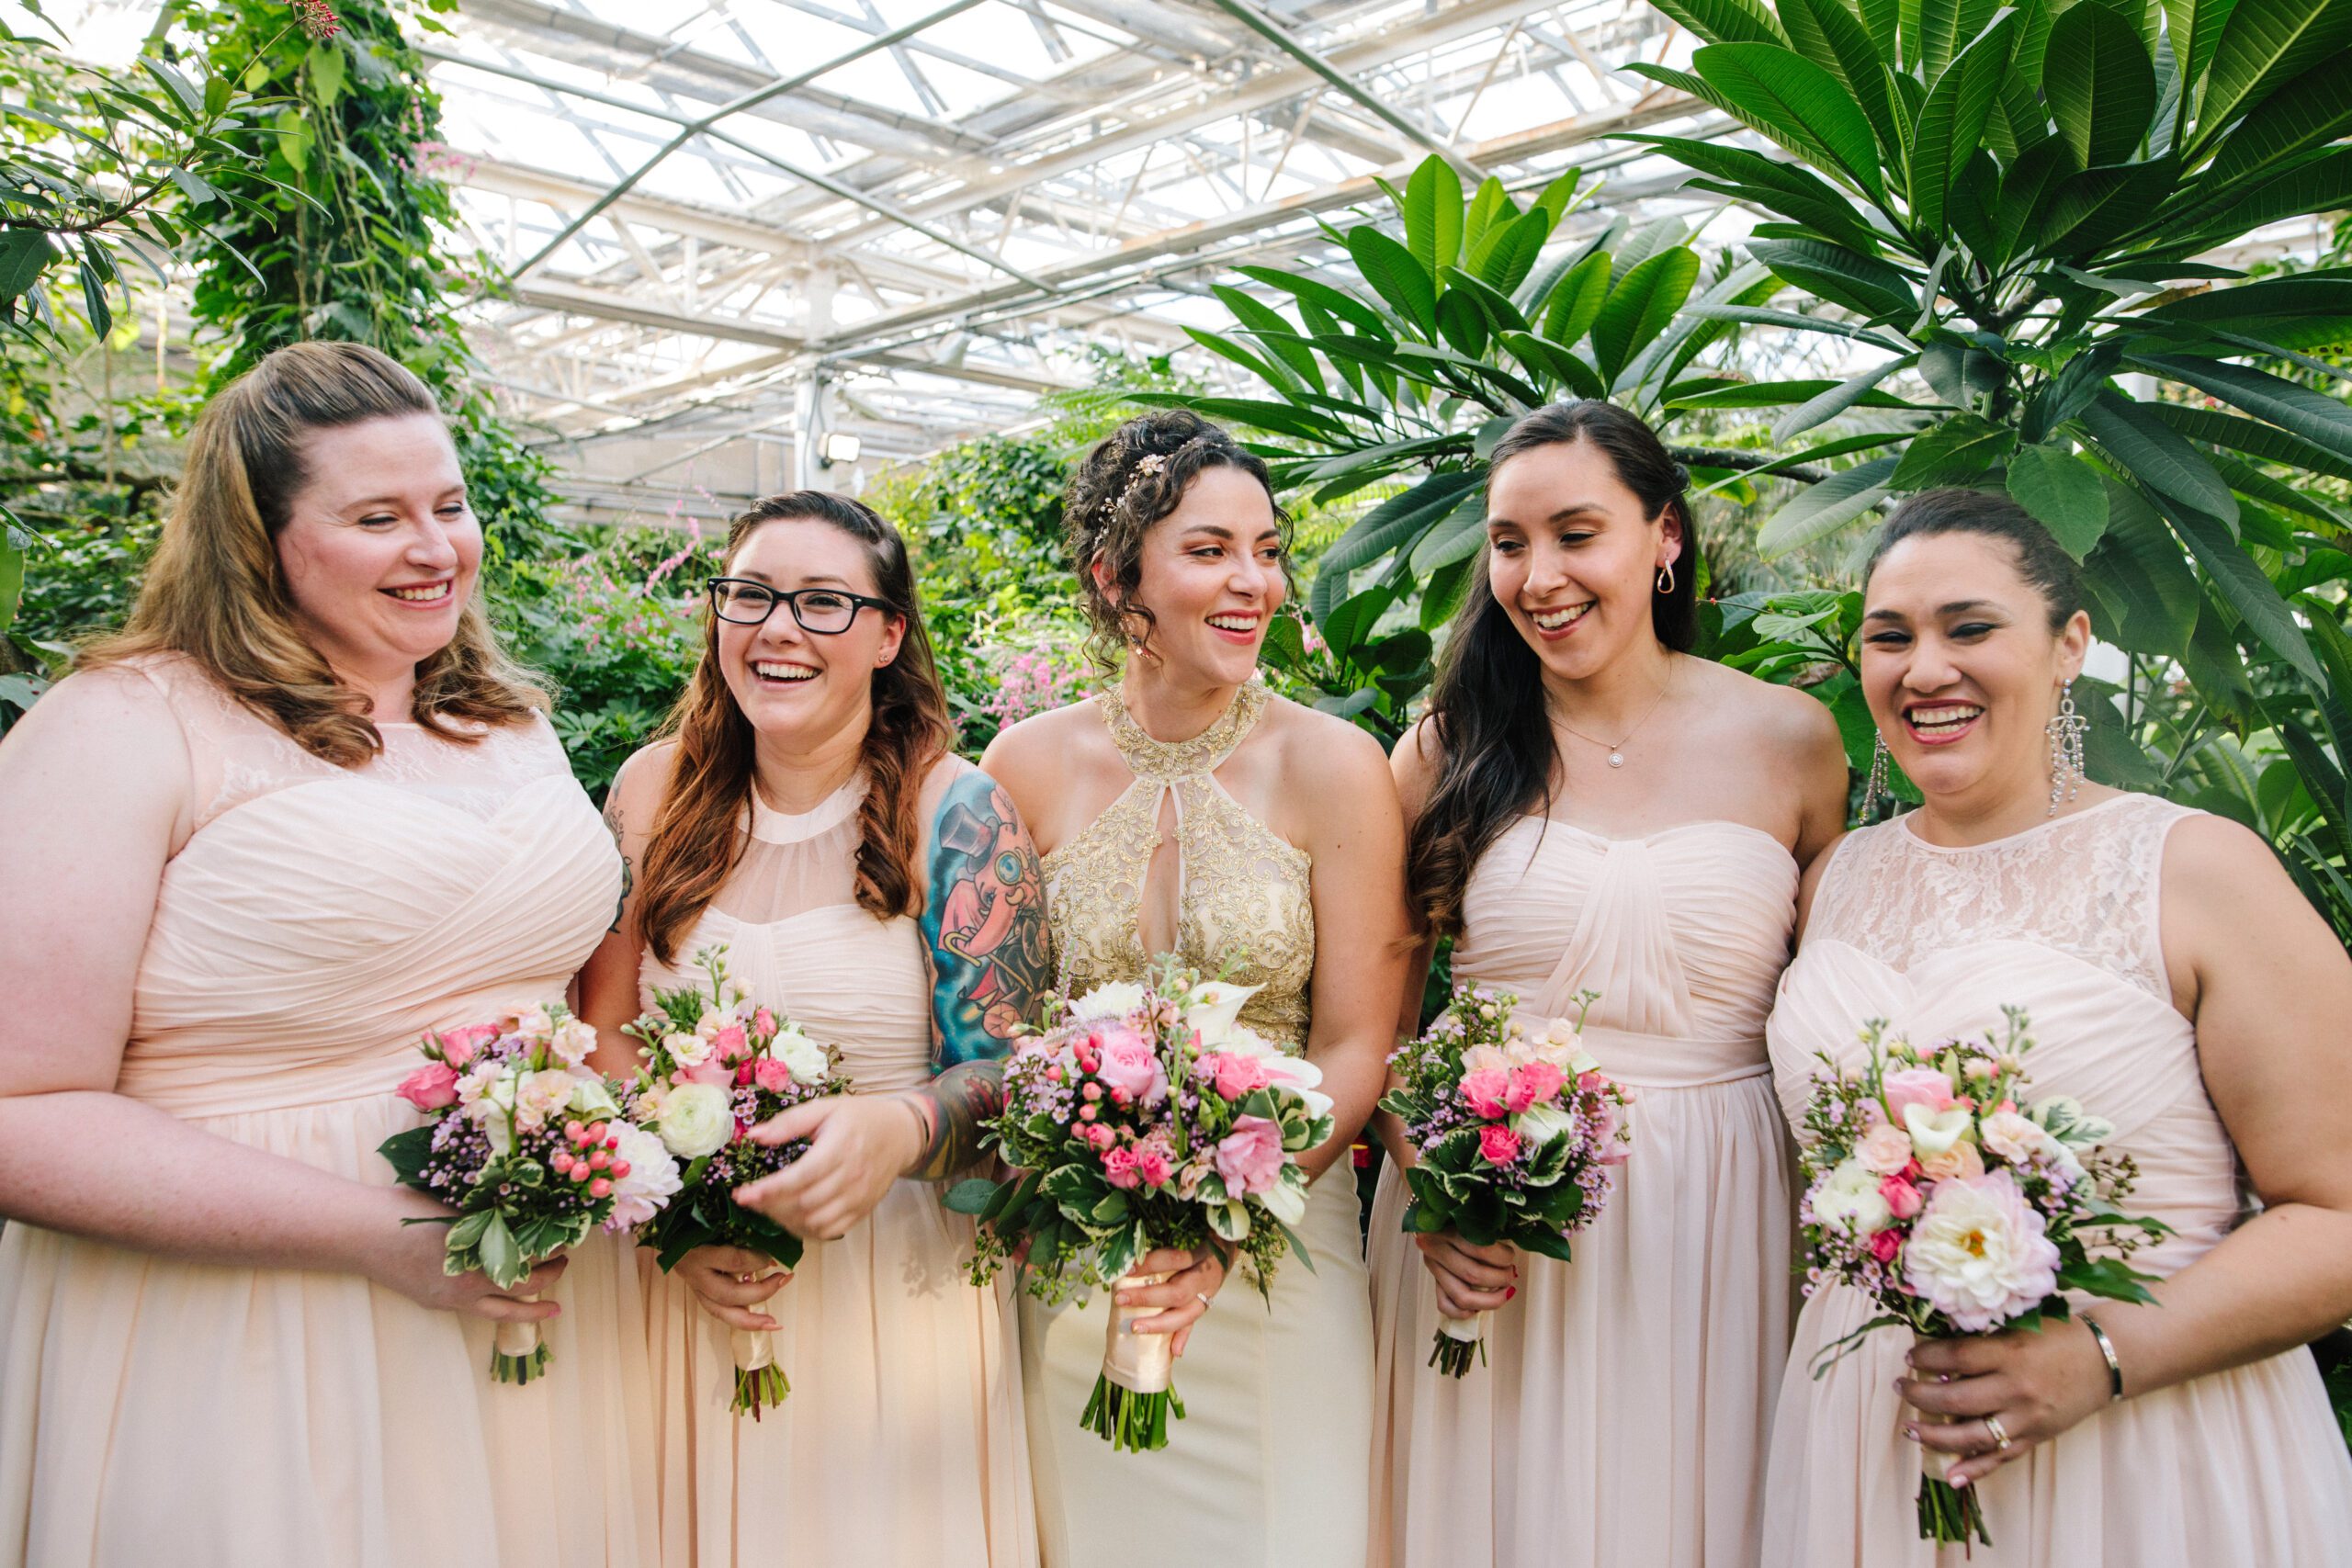 The bride wither ladies in pink dresses at her Butterfly Pavilion Wedding. ⁠